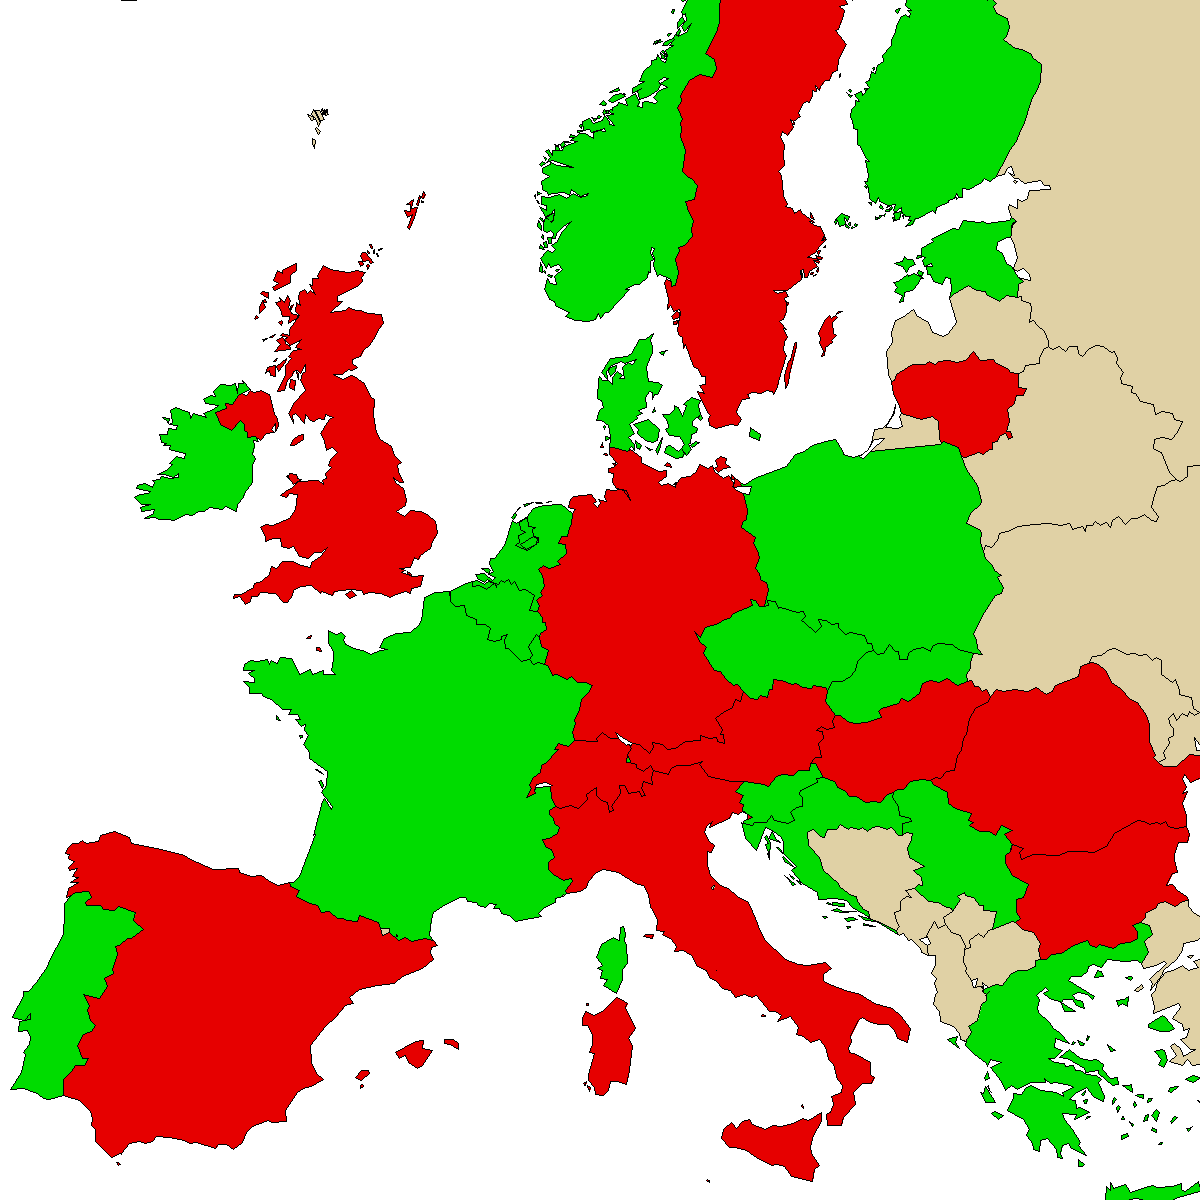 legal info map for our product 2FDCK, green are countries with no ban, red with ban, grey is unknown